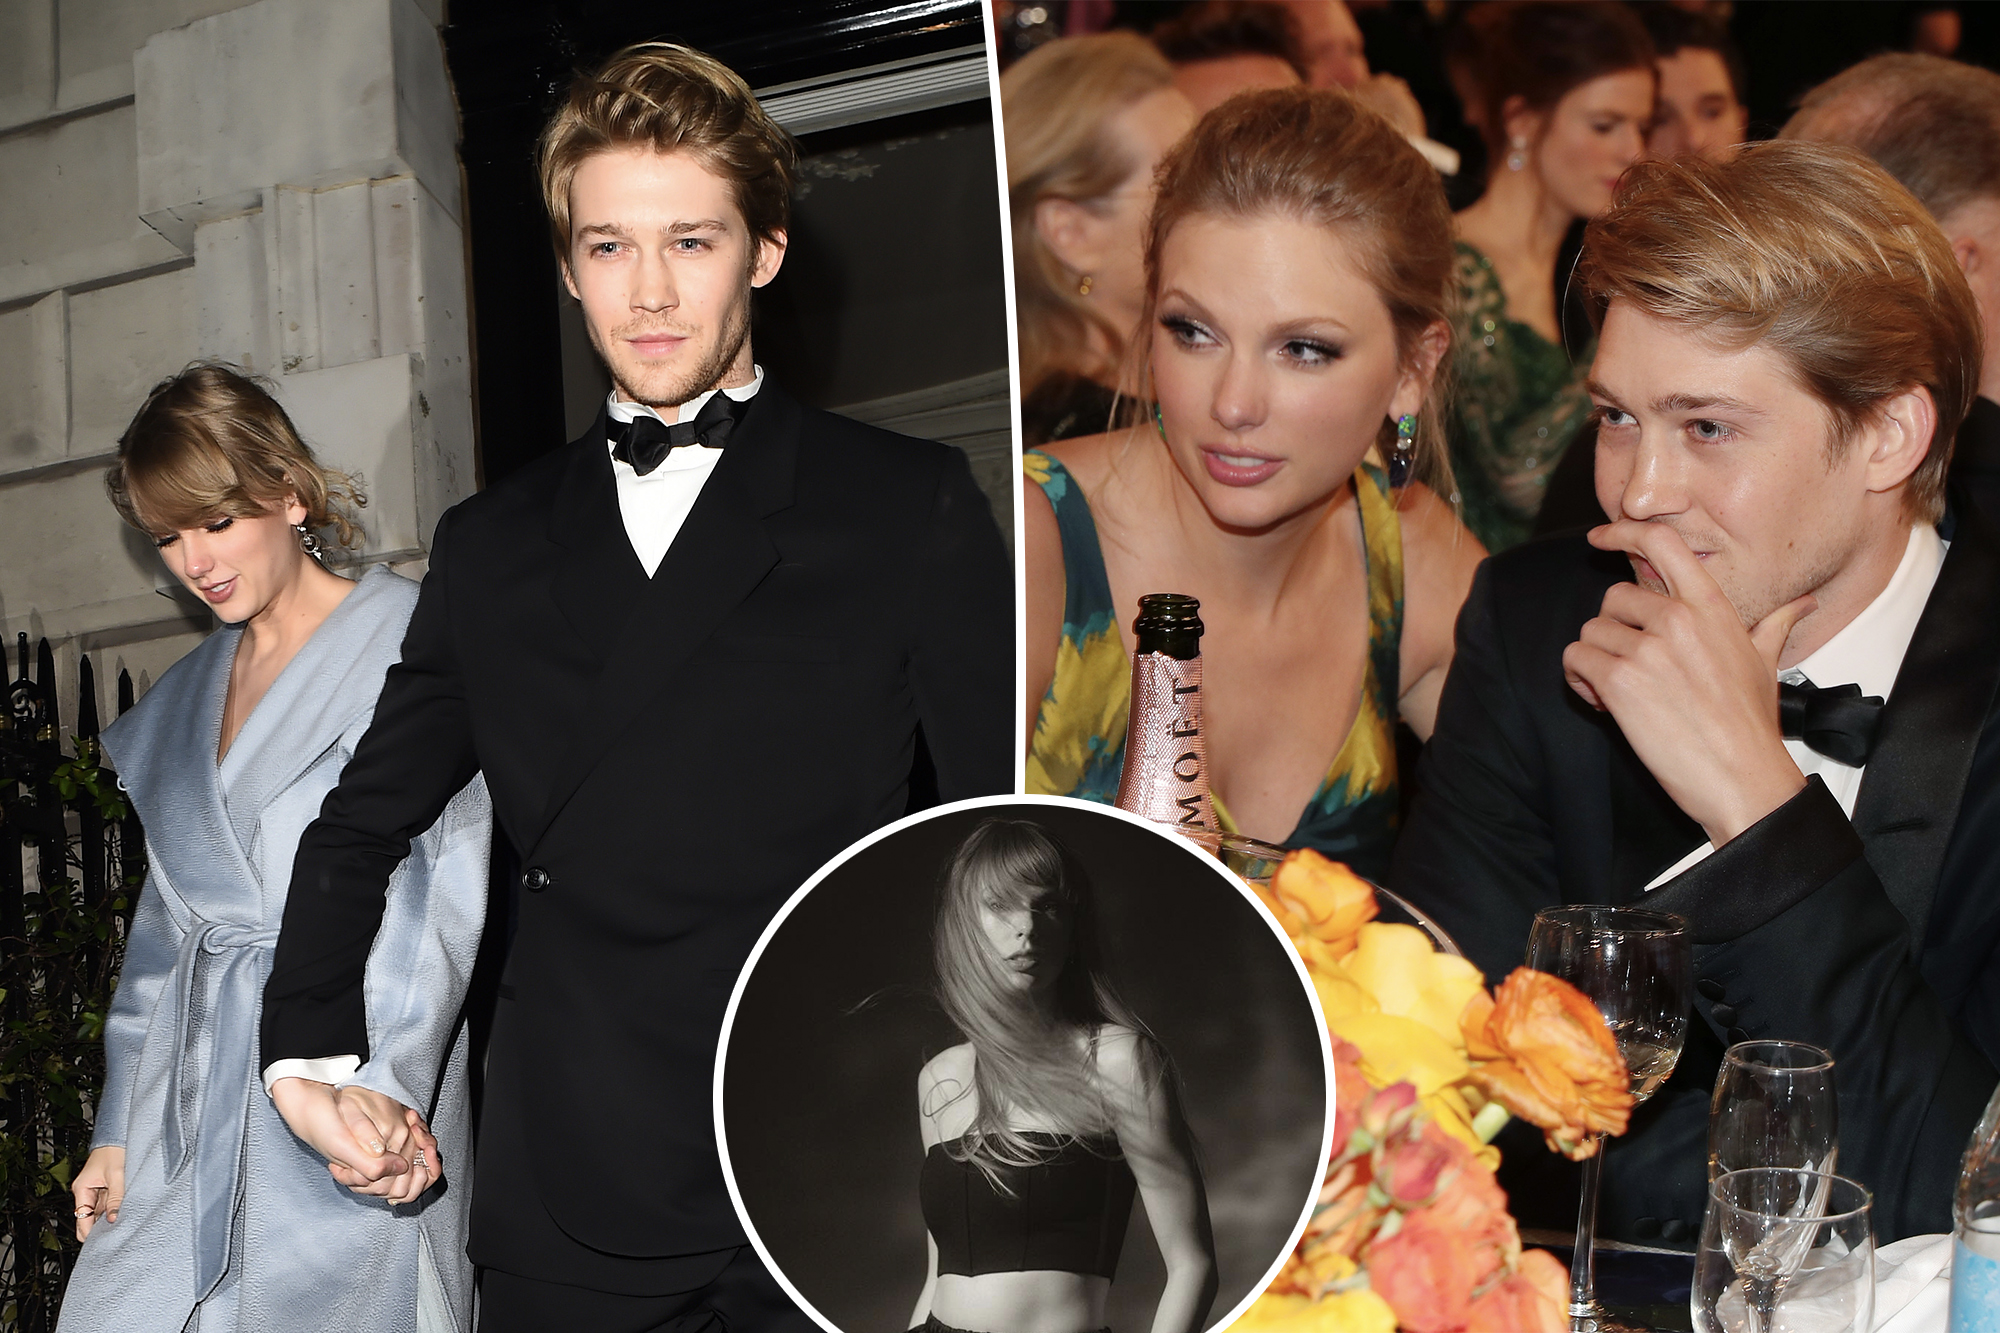 Joe Alwyn has 'moved on' from ex Taylor Swift, he's 'dating and happy': report